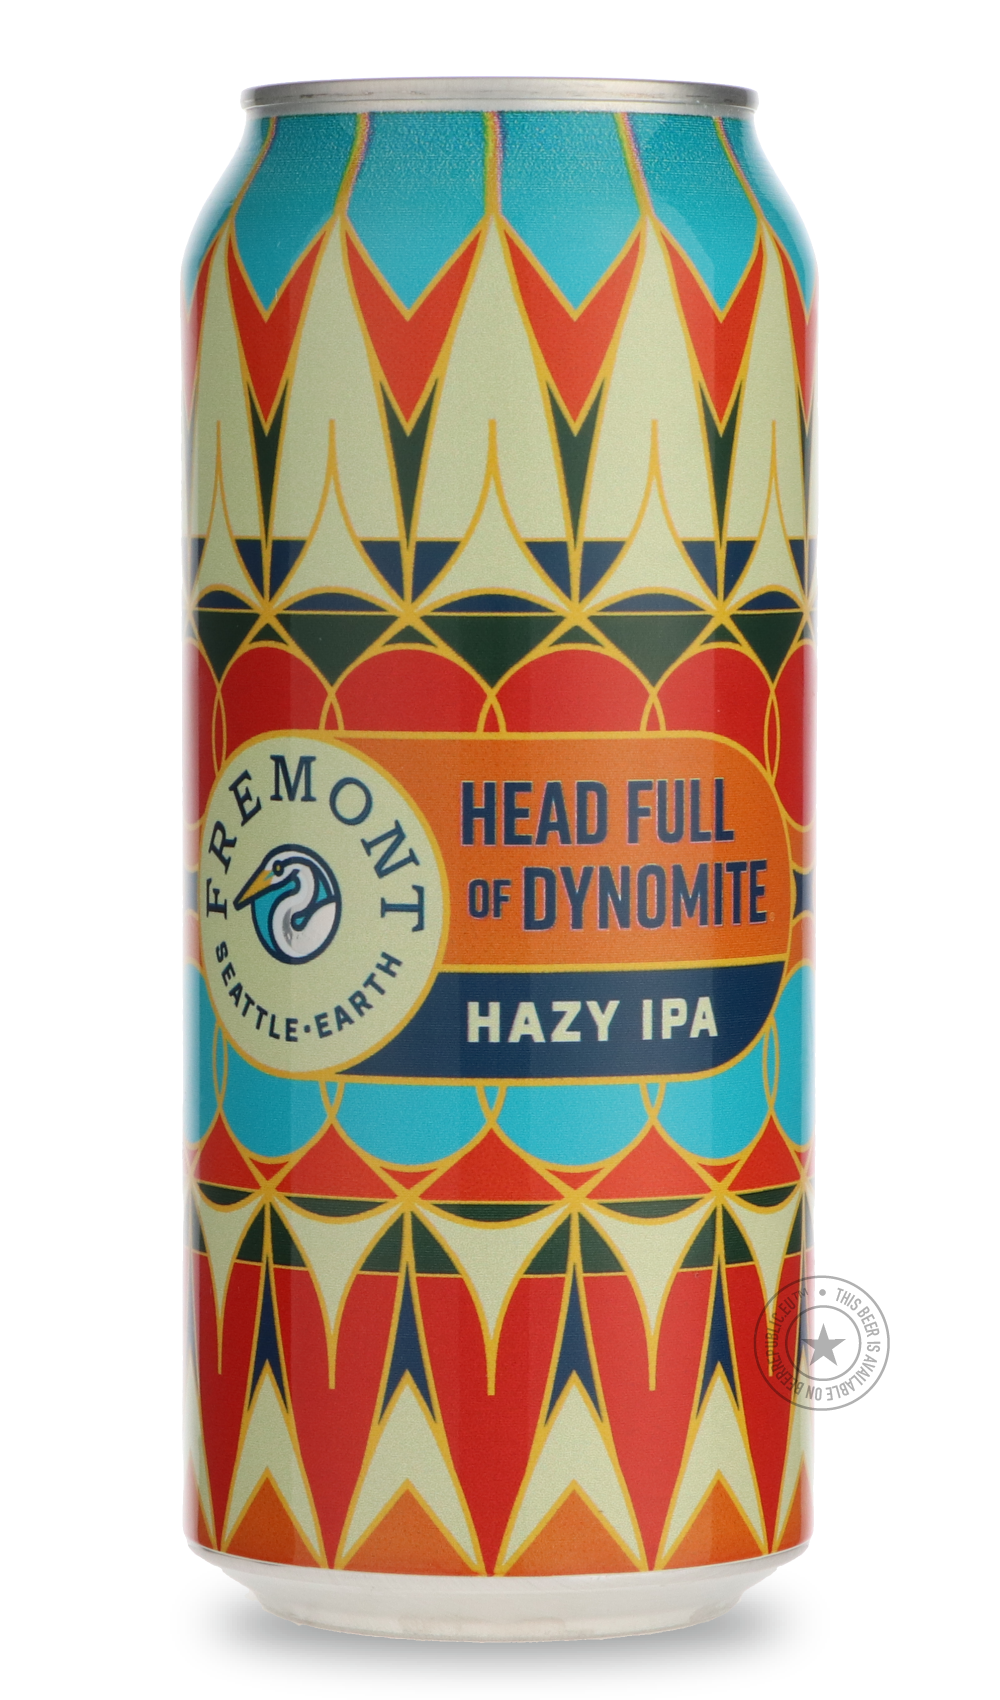 -Fremont- Head Full of Dynomite v.53-IPA- Only @ Beer Republic - The best online beer store for American & Canadian craft beer - Buy beer online from the USA and Canada - Bier online kopen - Amerikaans bier kopen - Craft beer store - Craft beer kopen - Amerikanisch bier kaufen - Bier online kaufen - Acheter biere online - IPA - Stout - Porter - New England IPA - Hazy IPA - Imperial Stout - Barrel Aged - Barrel Aged Imperial Stout - Brown - Dark beer - Blond - Blonde - Pilsner - Lager - Wheat - Weizen - Ambe